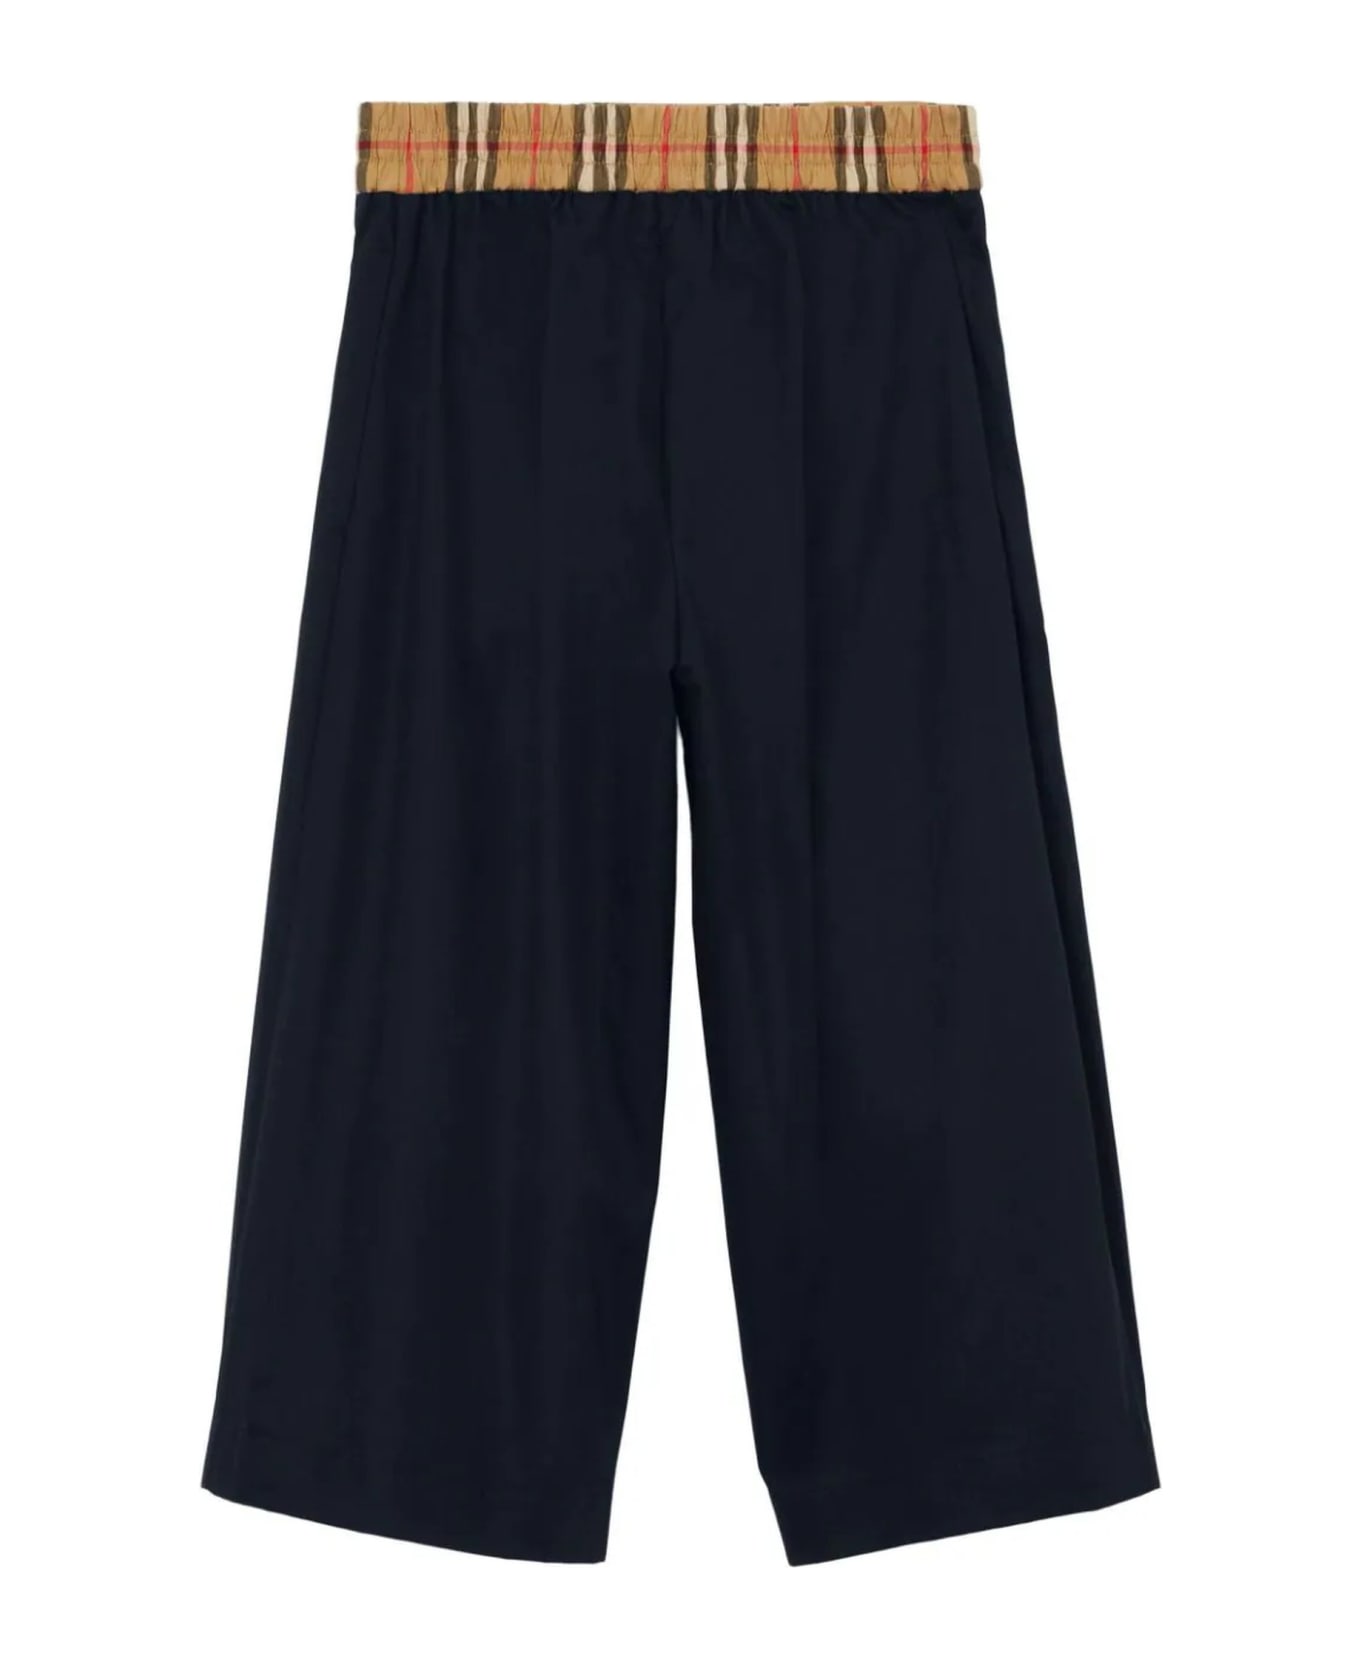 Burberry Navy Blue Cotton Trousers - Navy black